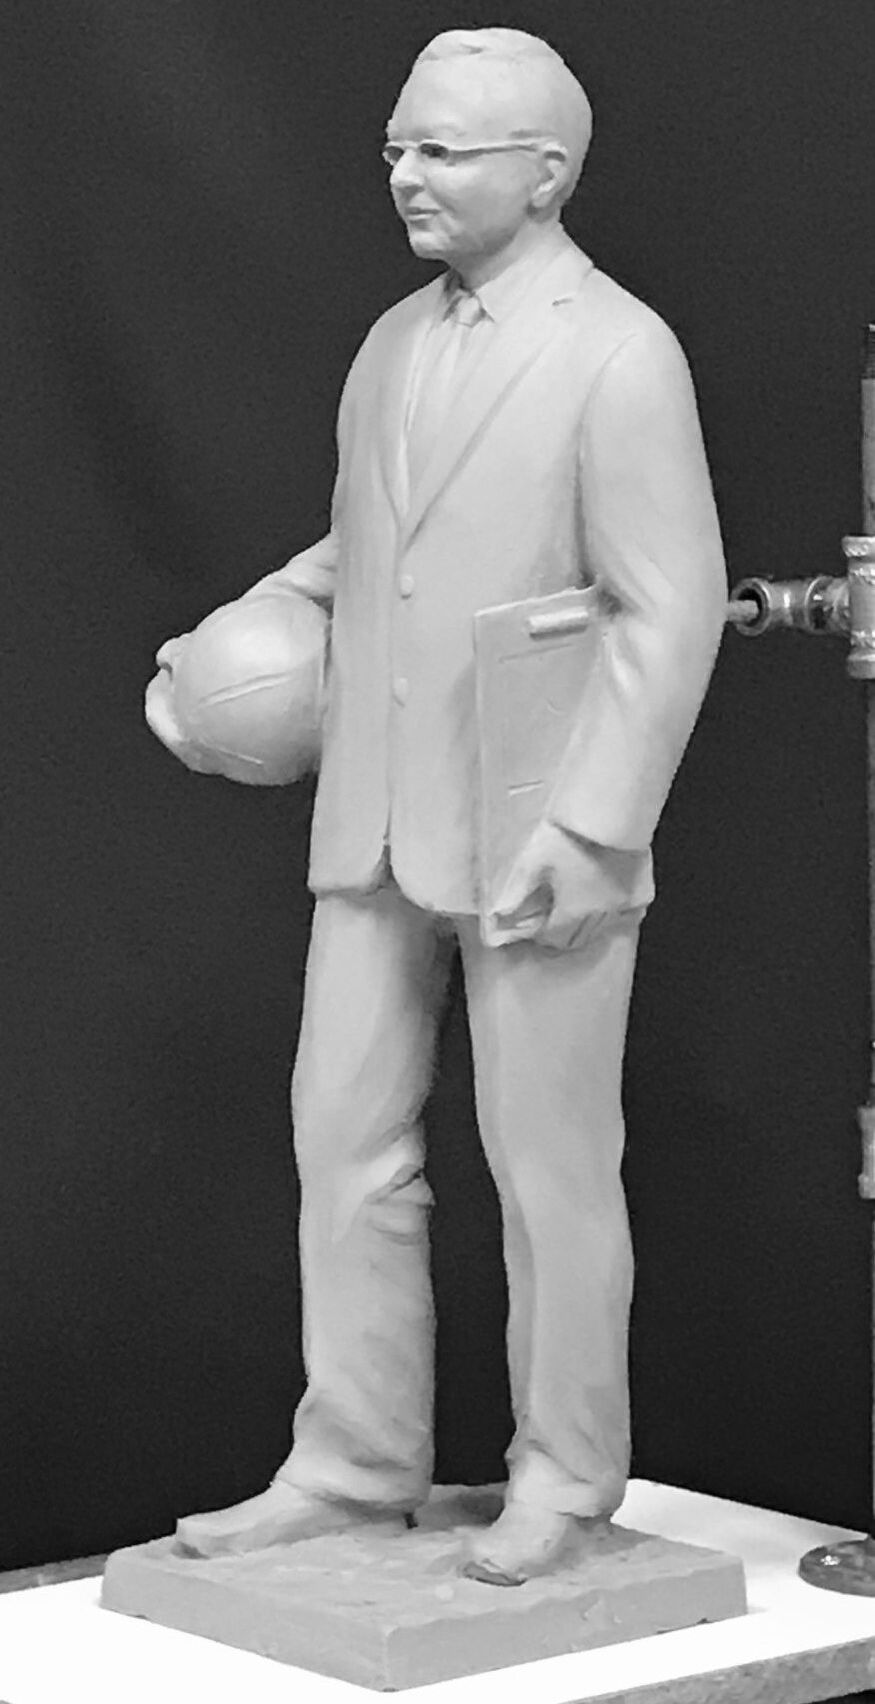 National Sculptors' Guild Fellow Gary Alsum has been selected to sculpt Gene Bess for placement at Three Rivers College in Poplar Bluff, Missouri. The school has been hard at work raising funds for this commemorative sculpture.  The bronze will be a life-sized standing figure depicting the coach with basketball in hand wearing his familiar suit and tie. The sculpture will be located on the entry plaza of the Libla Family Sports Center in 2022.  The former coach of the men's basketball team at Three Rivers Community College was hired in 1971.  ​His career win-loss record is 1,300-416 (.757 winning percentage), making him the all-time winningest college basketball coach.  In his time at Three Rivers, he won two national junior college basketball titles, in 1979 and 1992, and was the first college coach to reach 1,000 and 1,200 wins. Bess coached NBA player Latrell Sprewell at Three Rivers. Bess announced his retirement from coaching in May 2020 after suffering from health problems during his final years on the bench.